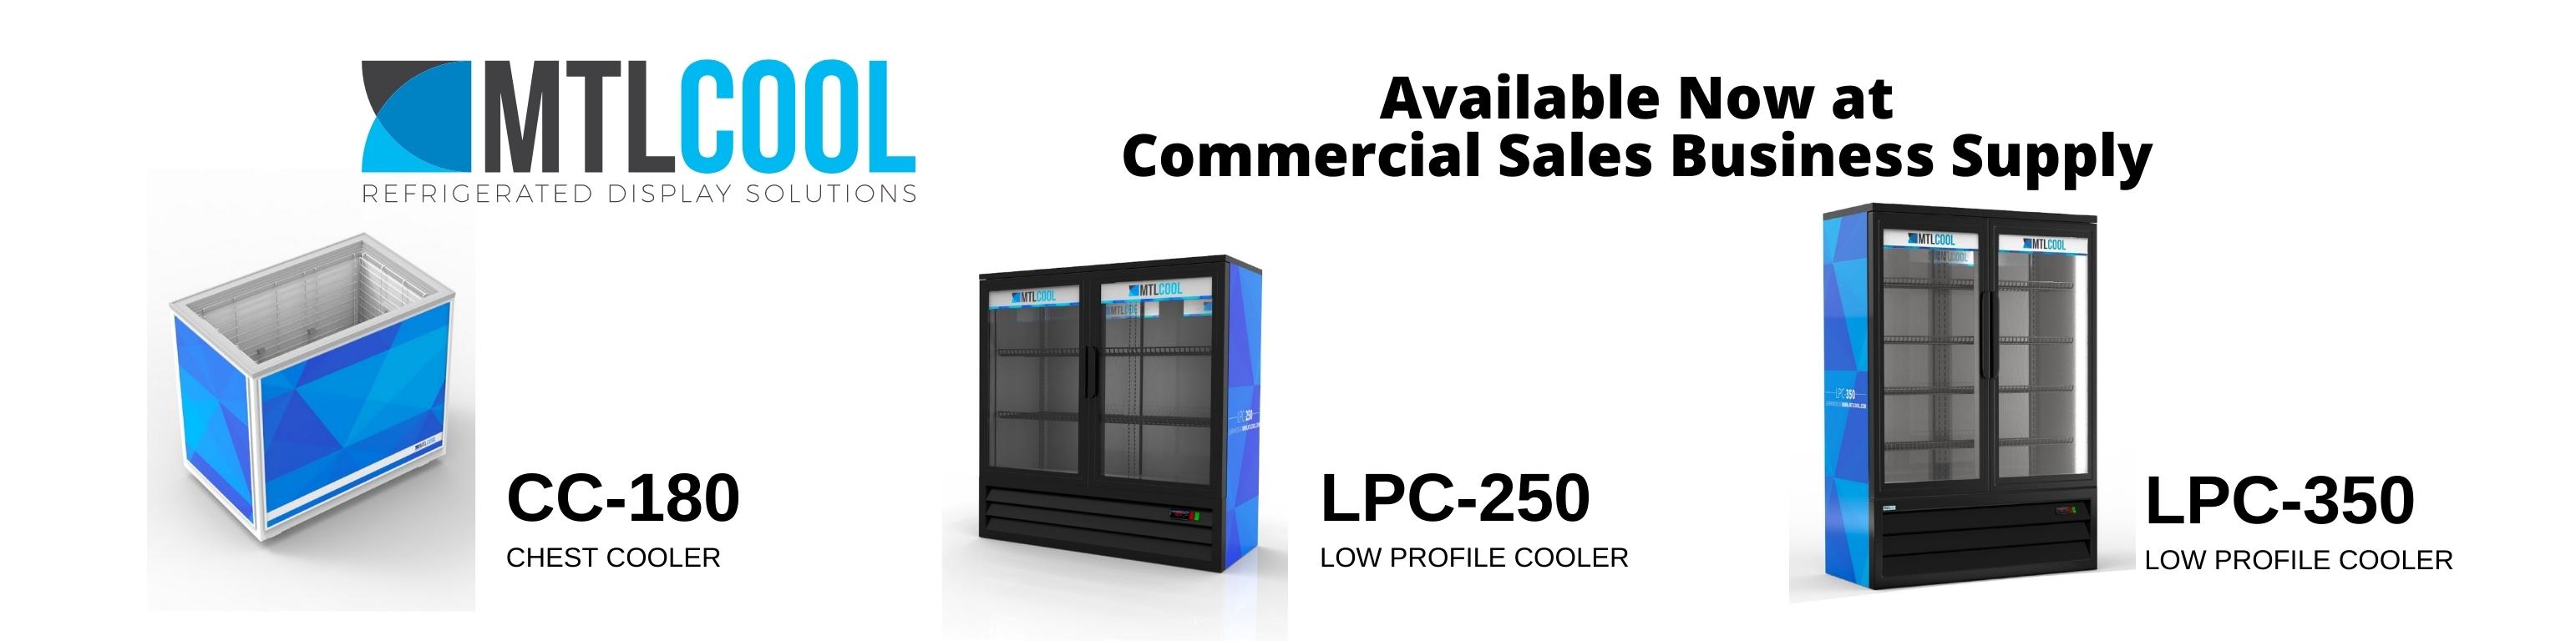 Commercial Sales